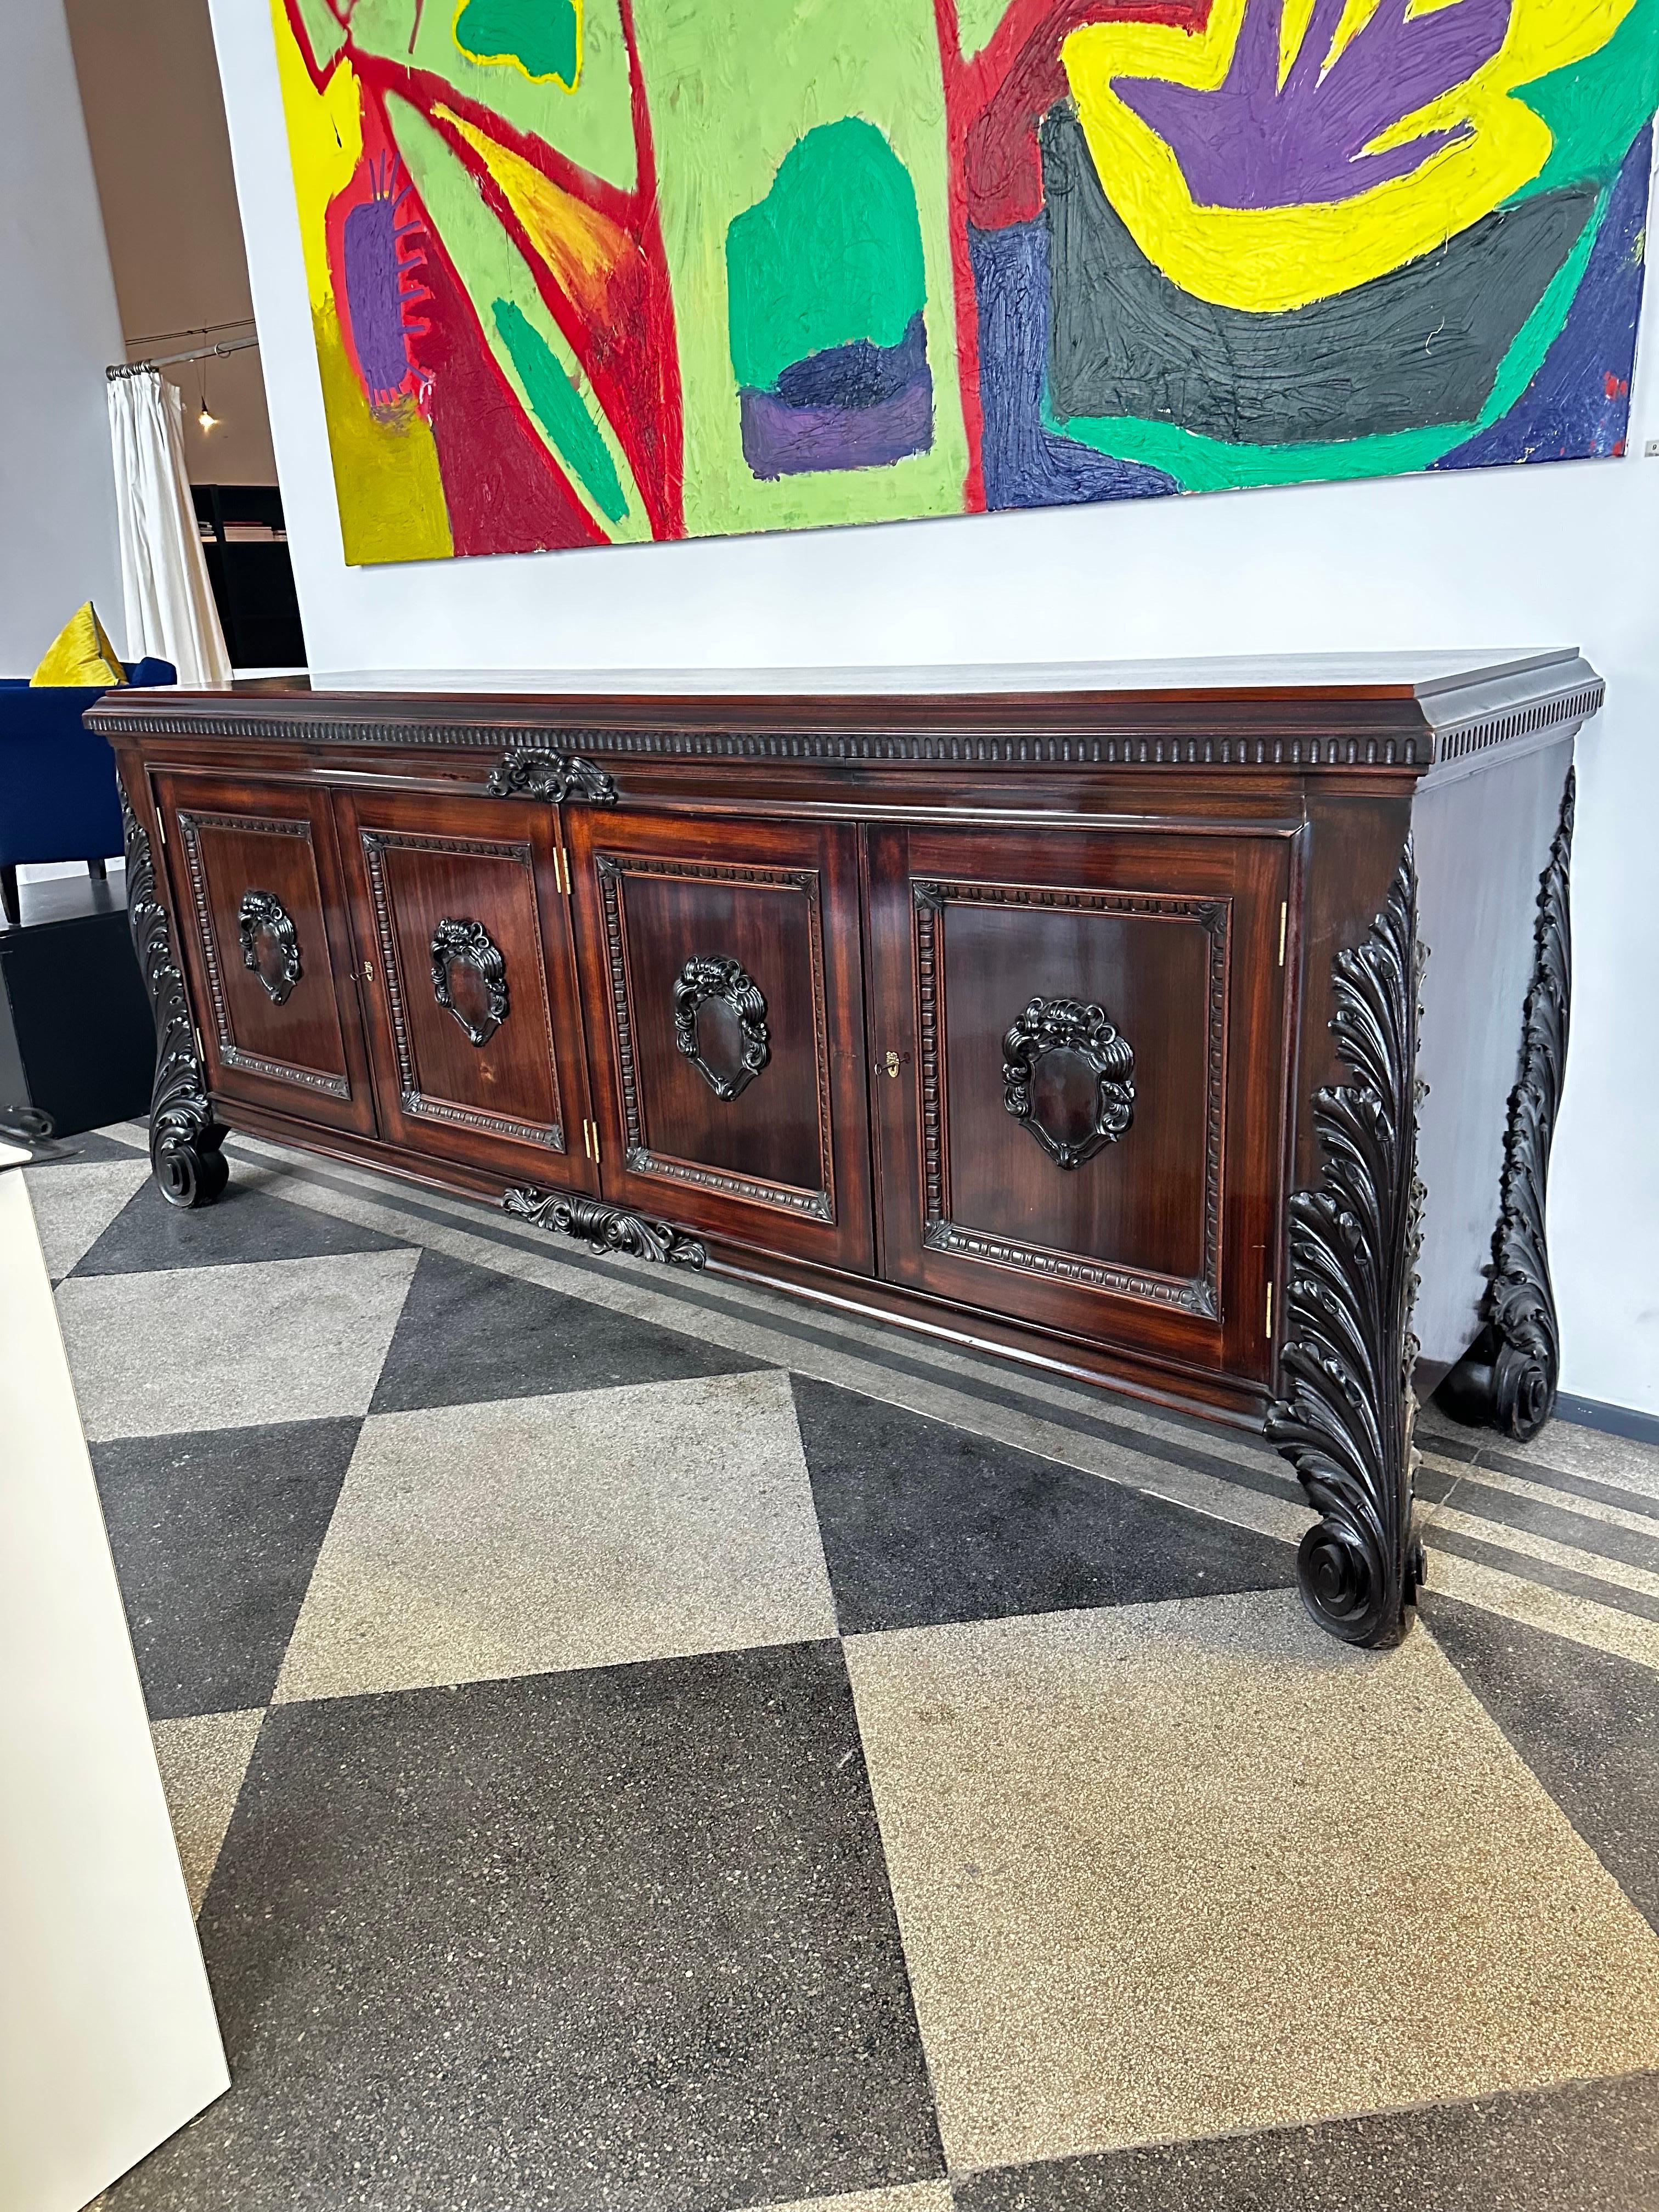 Impressive huge and all original Jugenstil buffet or sideboard by famous Viennese carpenter Anton Pospischil. Anton Pospischil furniture is regarded as one of the most acclaimed furniture makers of the Jugenstil years as he made all the designs by